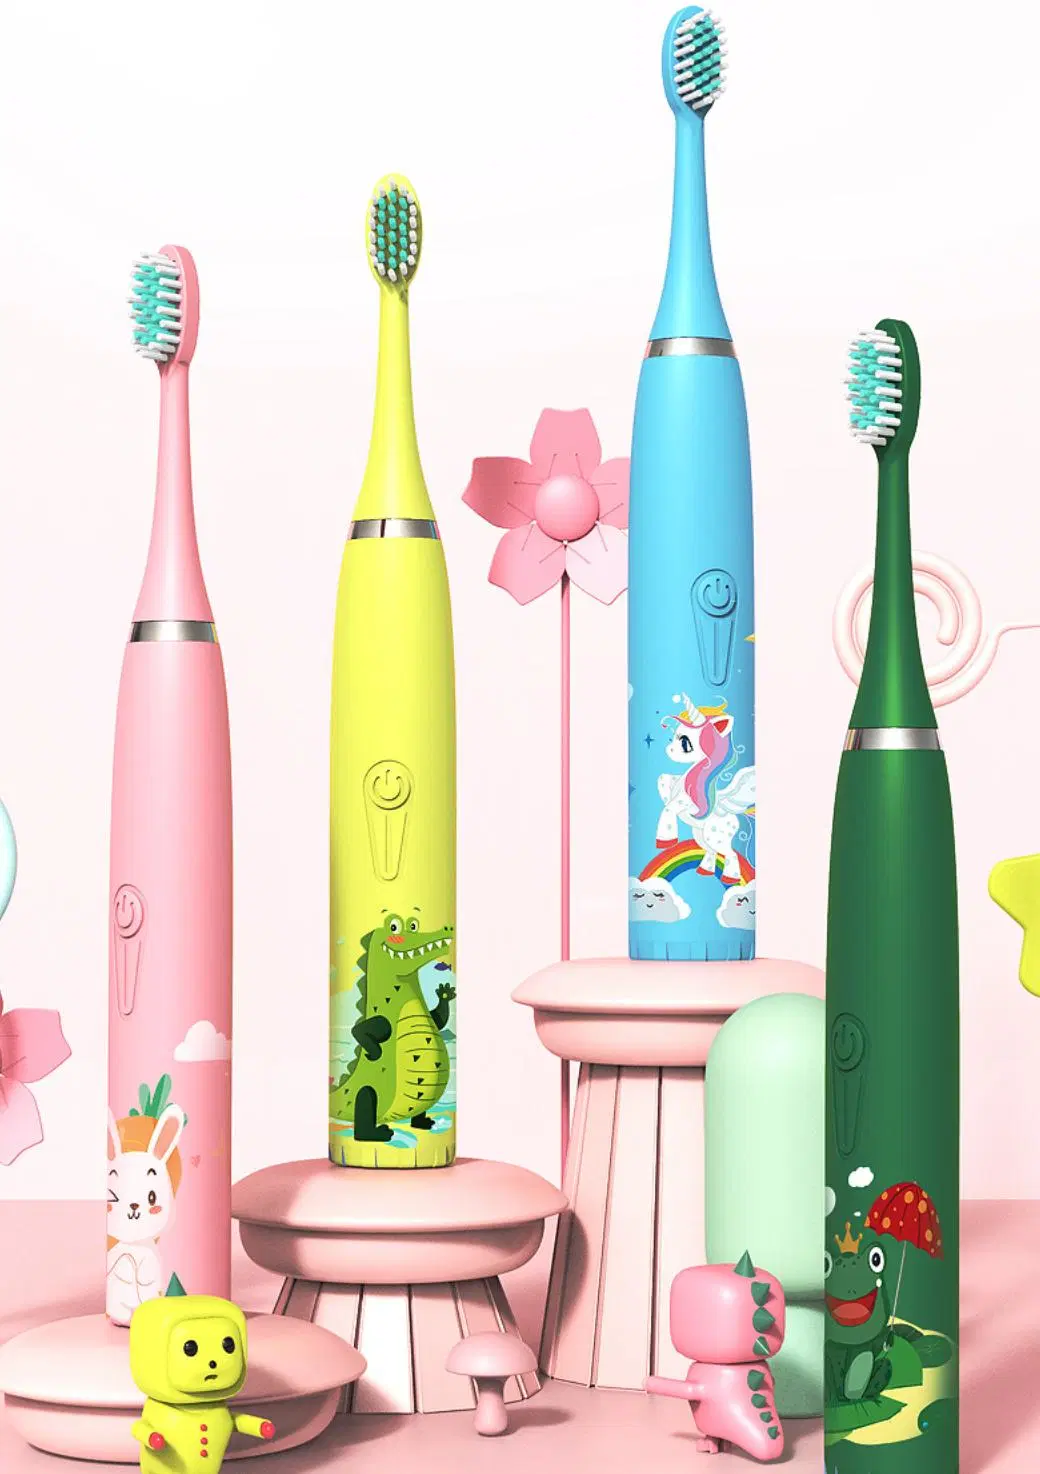 Professional Wholesale Ipx7 Waterproof Sonic Toothbrush Adult Rechargeable Electric Toothbrush